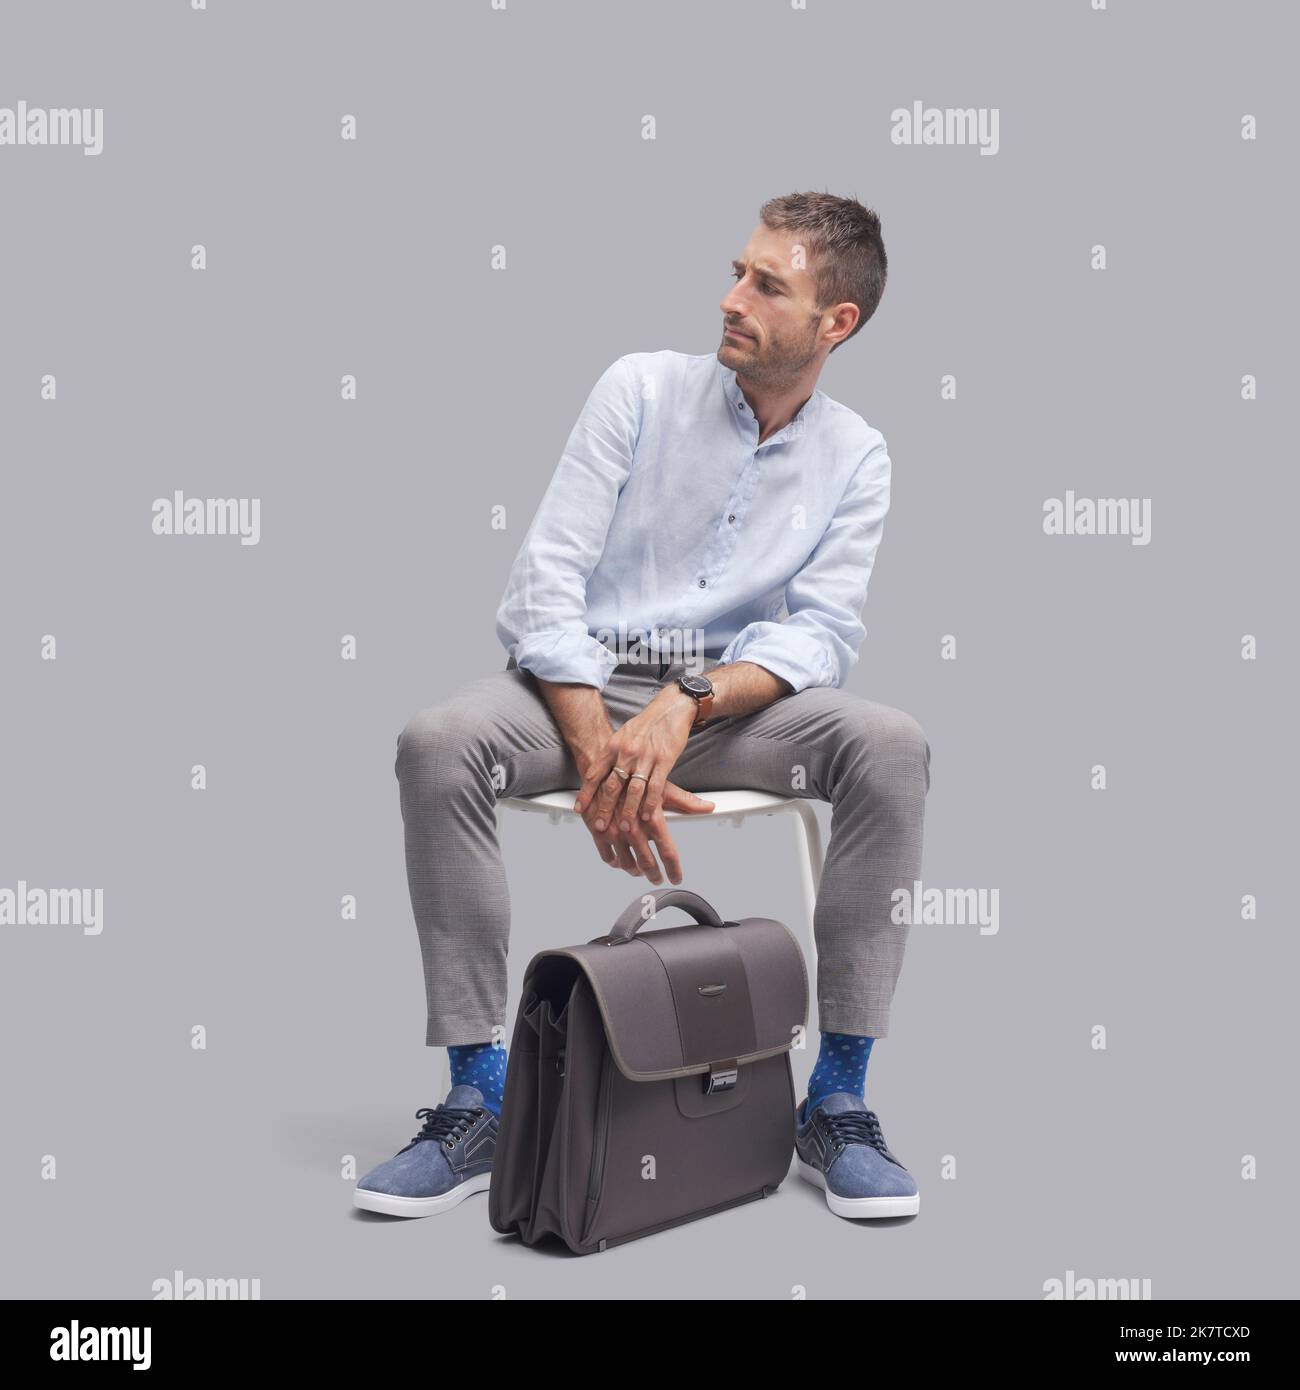 Disappointed man sitting on a chair and looking at his side, he is waiting for a job interview Stock Photo